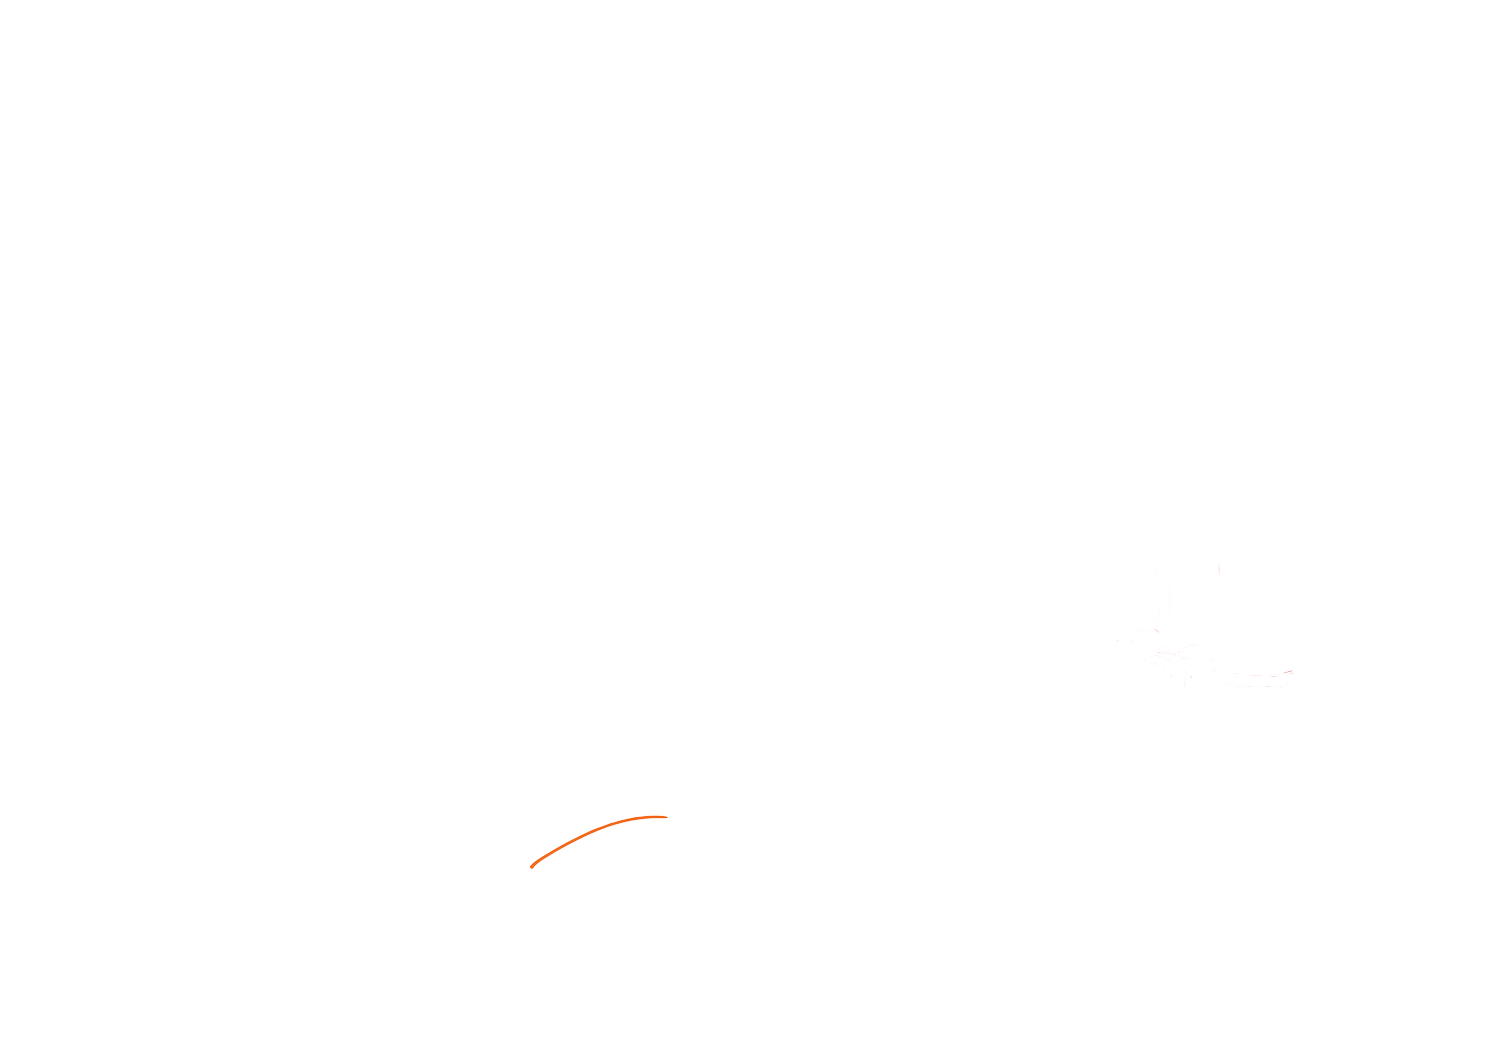 Our Harborplace